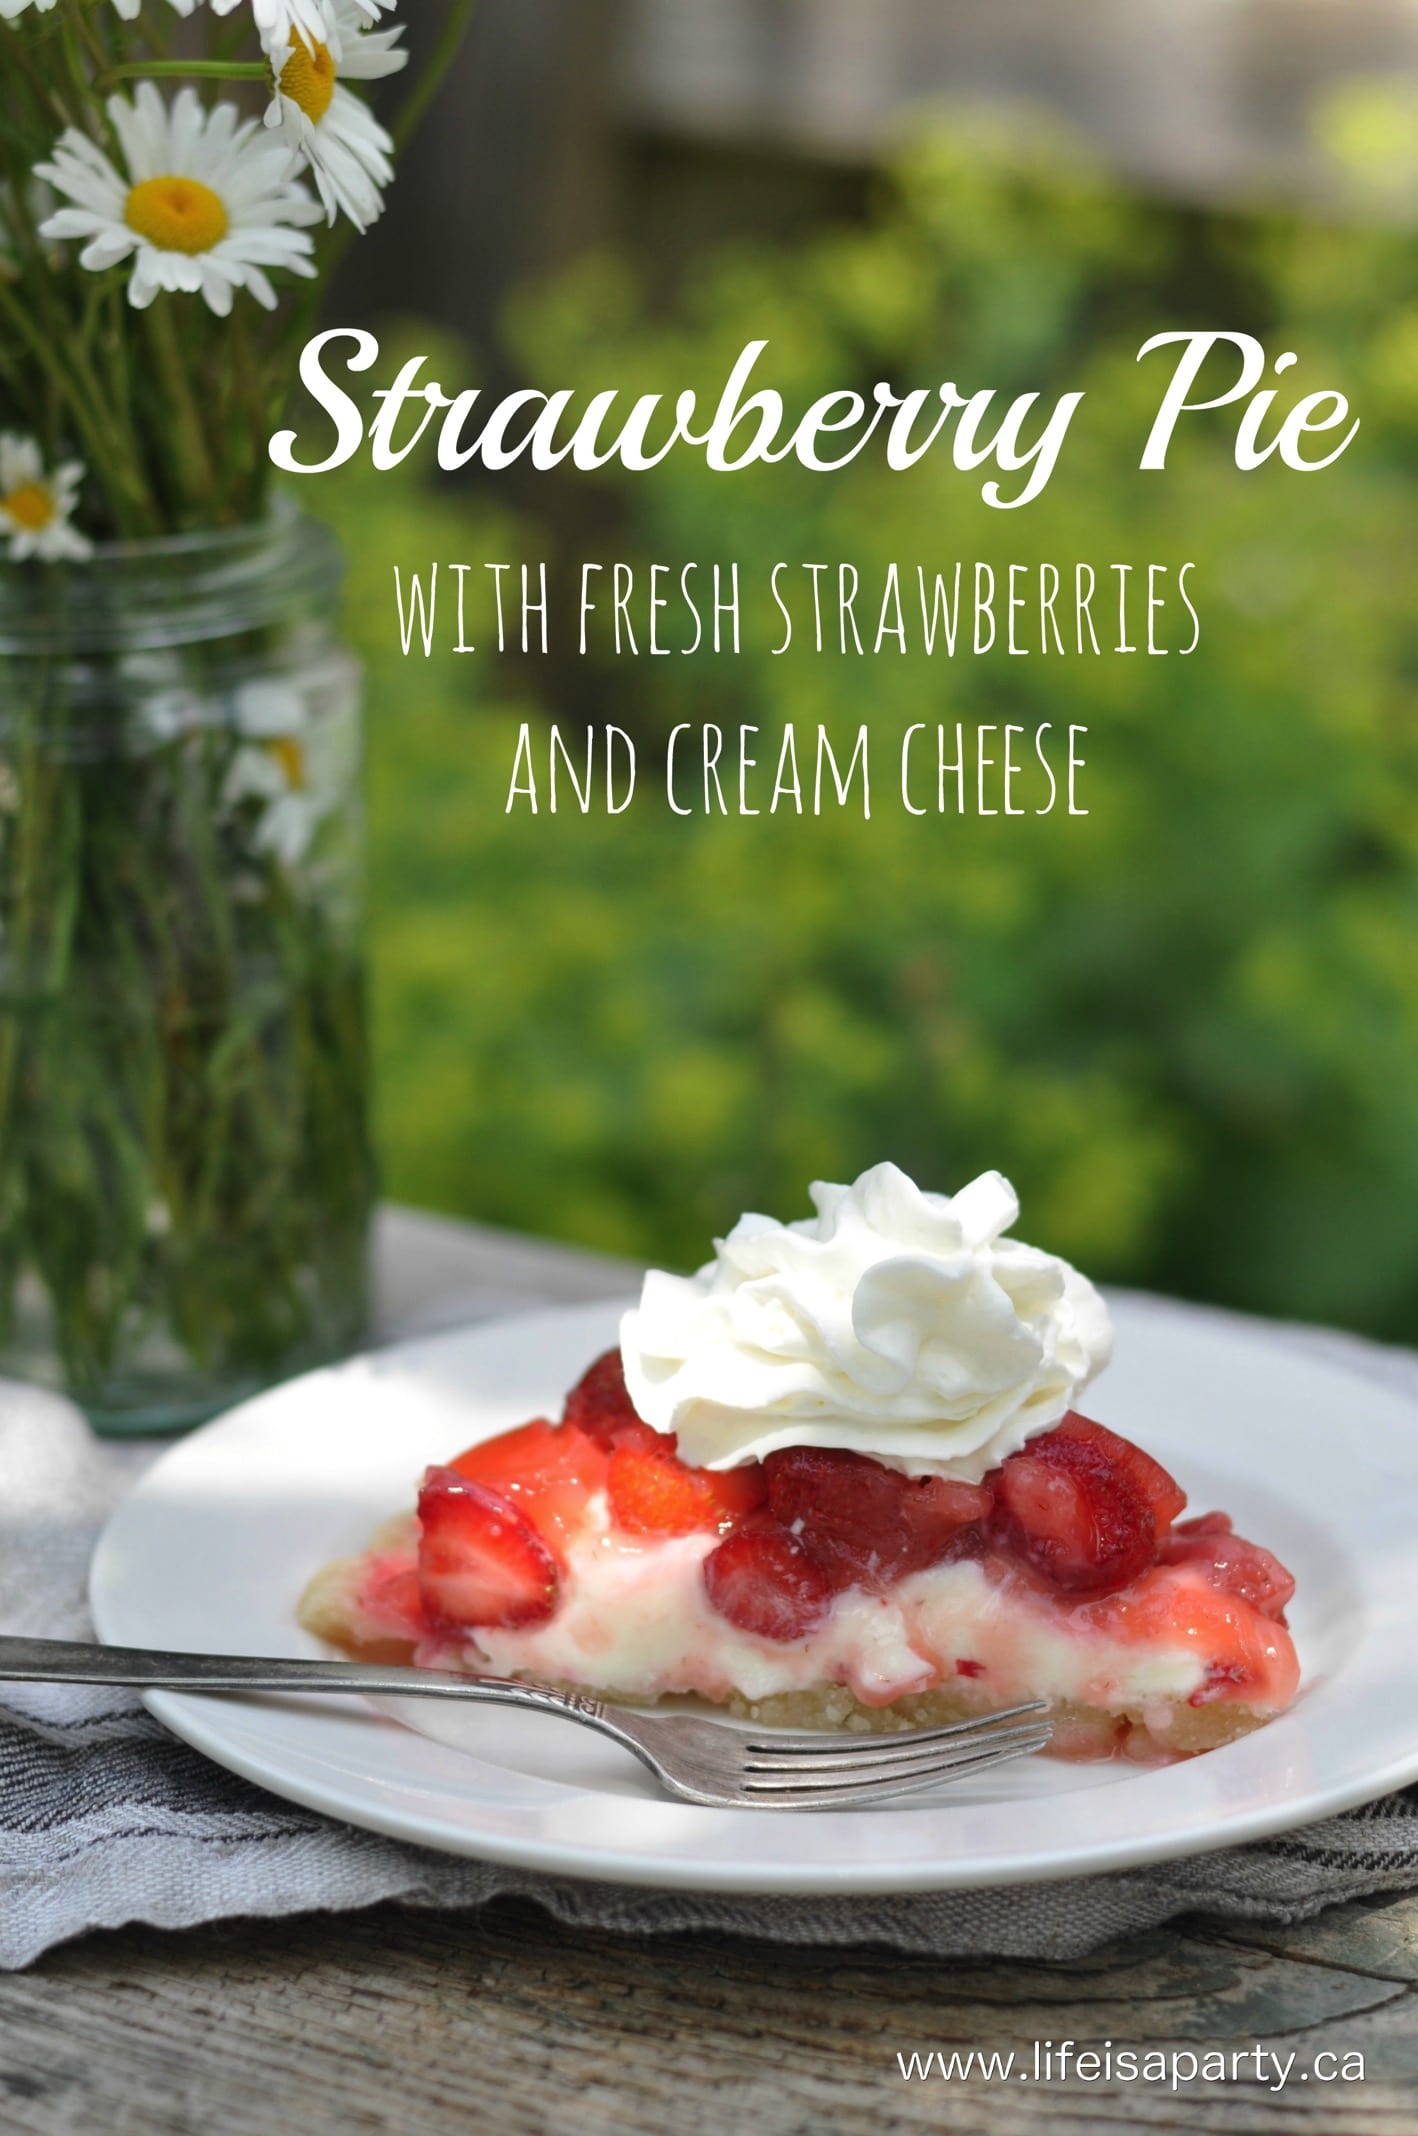 Strawberry Cheesecake Pie with Fresh Strawberrie: Easy recipe with no-fail, no-roll crust, a creamy cream cheese cheesecake layer, and fresh strawberries.